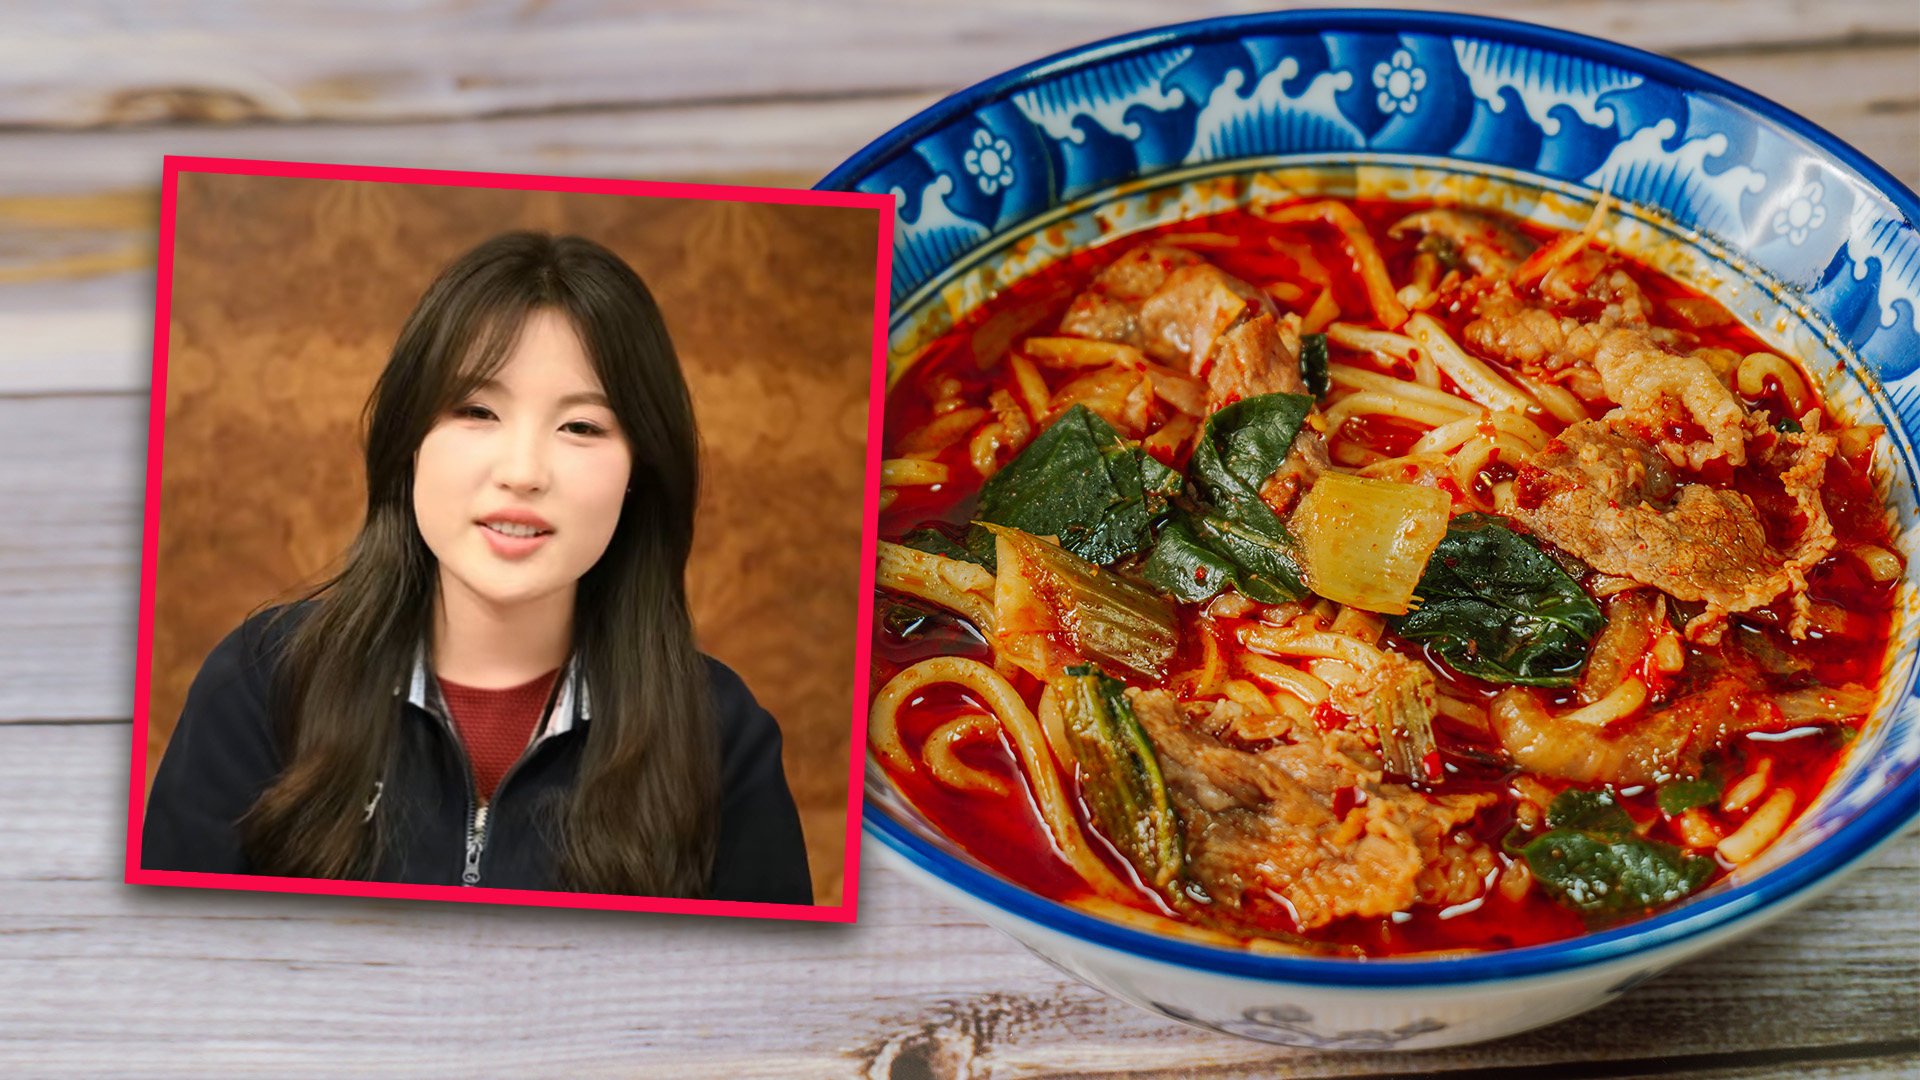 A super-hot noodle dish made by a young student in central China is threatening to topple Sichuan in the spicy food rankings and earned her the nickname “Princess of Malatang”. Photo: SCMP composite/Shutterstock/Douyin
